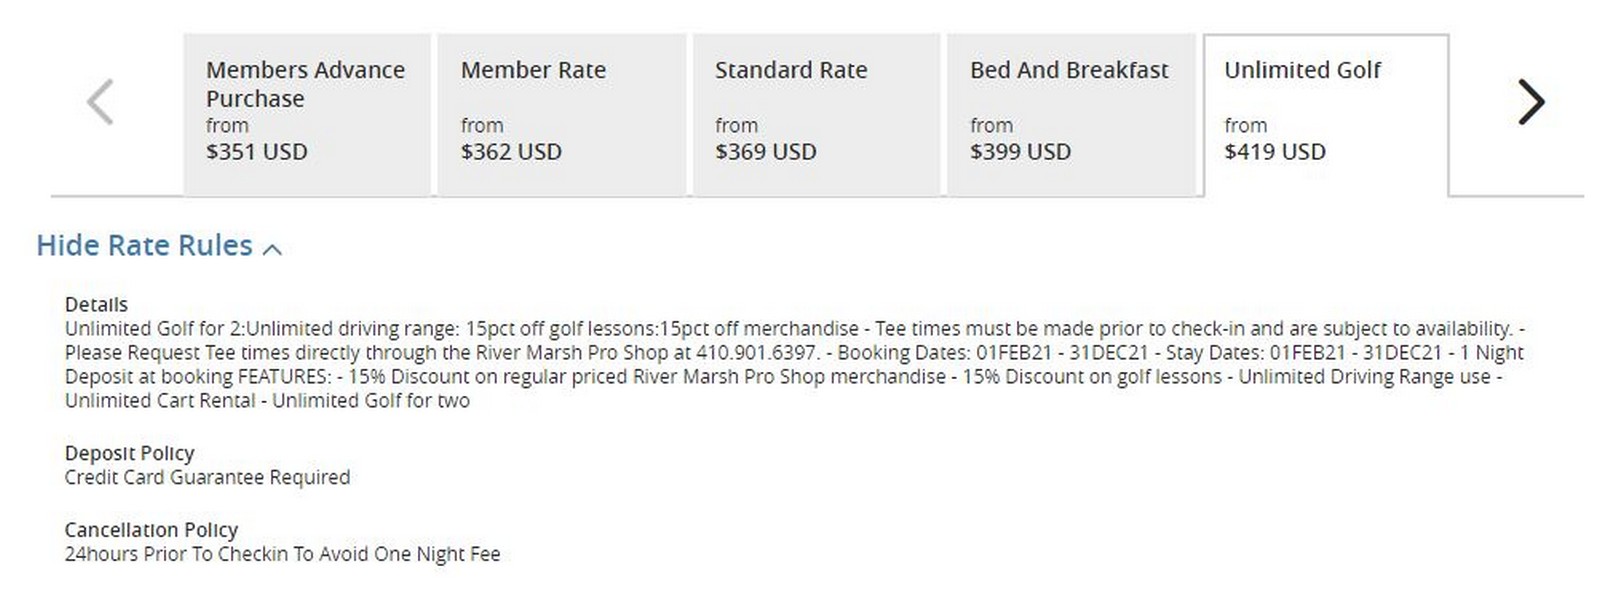 Hyatt With Unlimited Golf Package